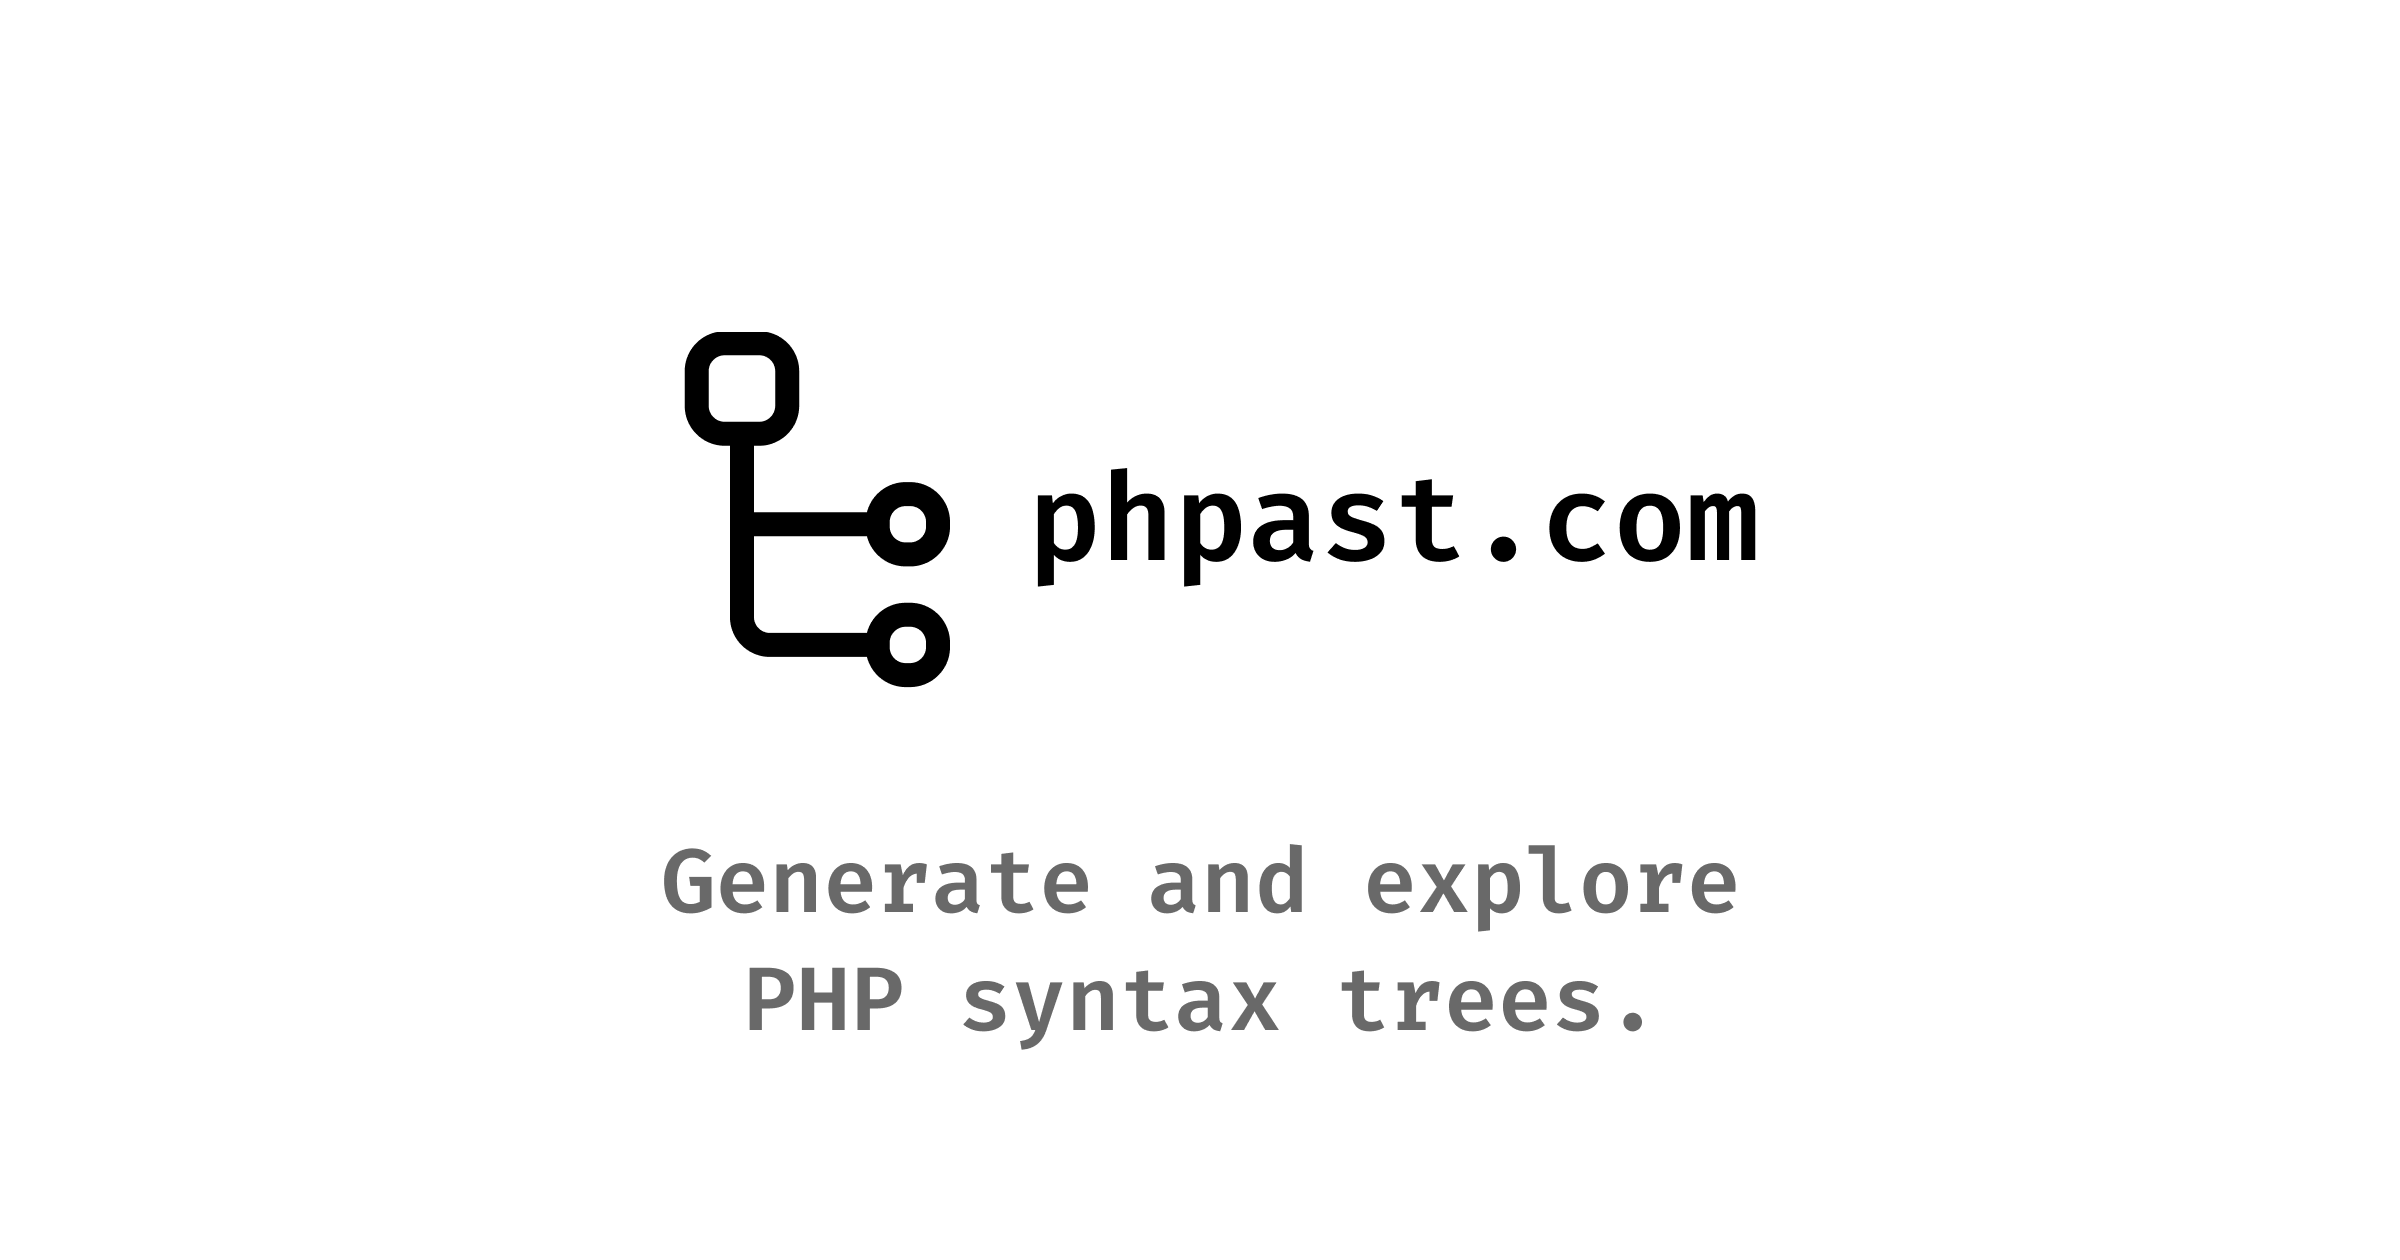 phpast.com